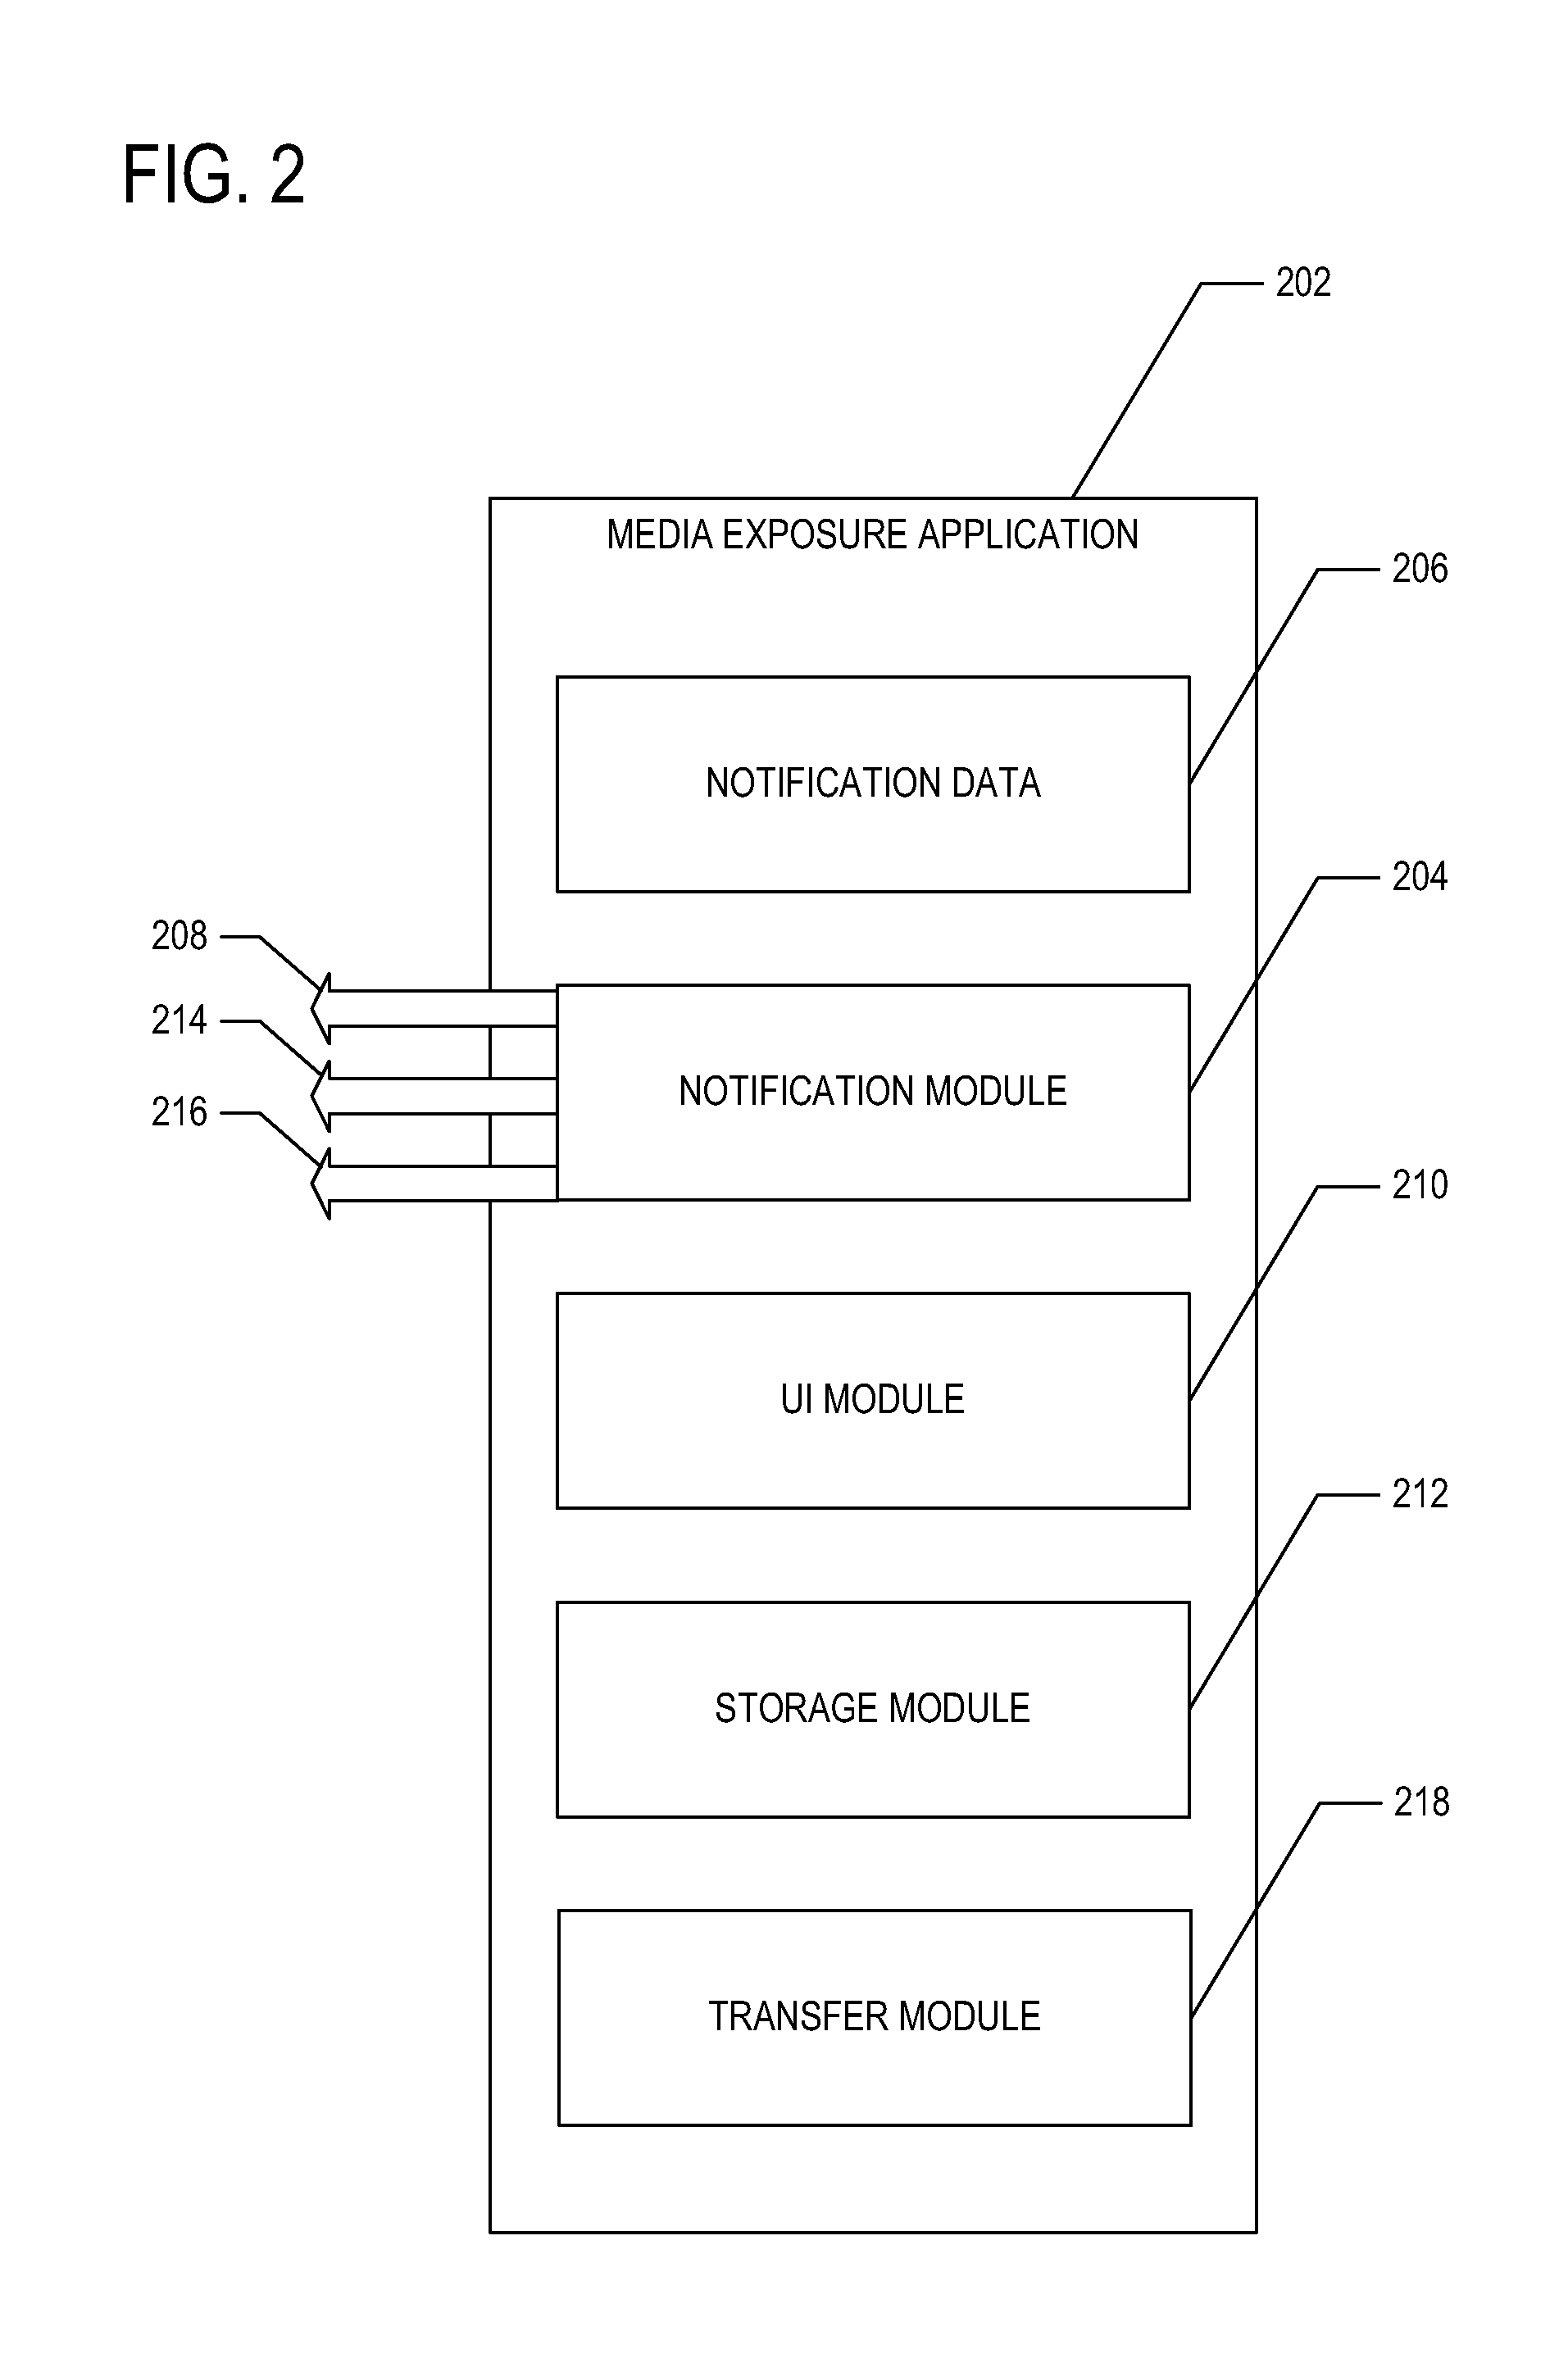 Methods and systems for measuring exposure to media